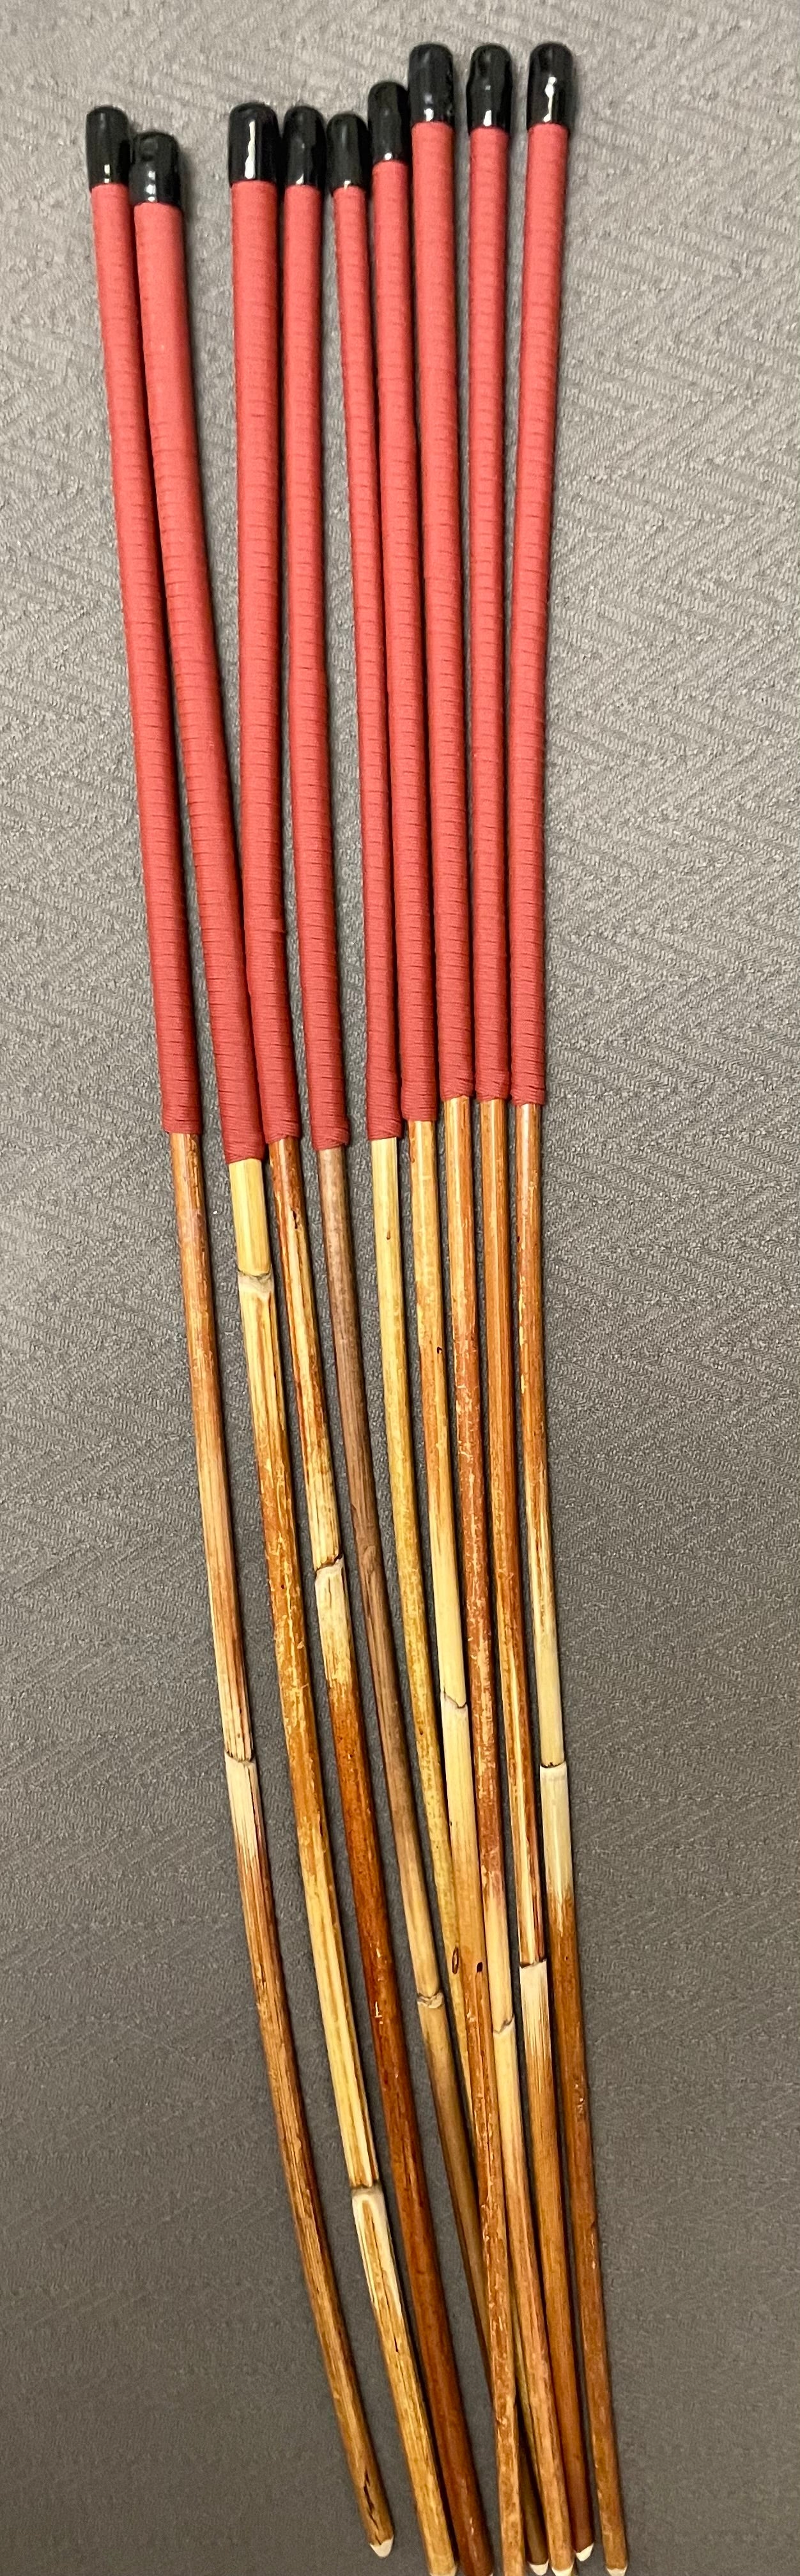 Set of 9 Classic Dragon Rattan Punishment Canes / BDSM Canes with Brick Red Paracord Handles - 95 cms Length - Englishvice Canes